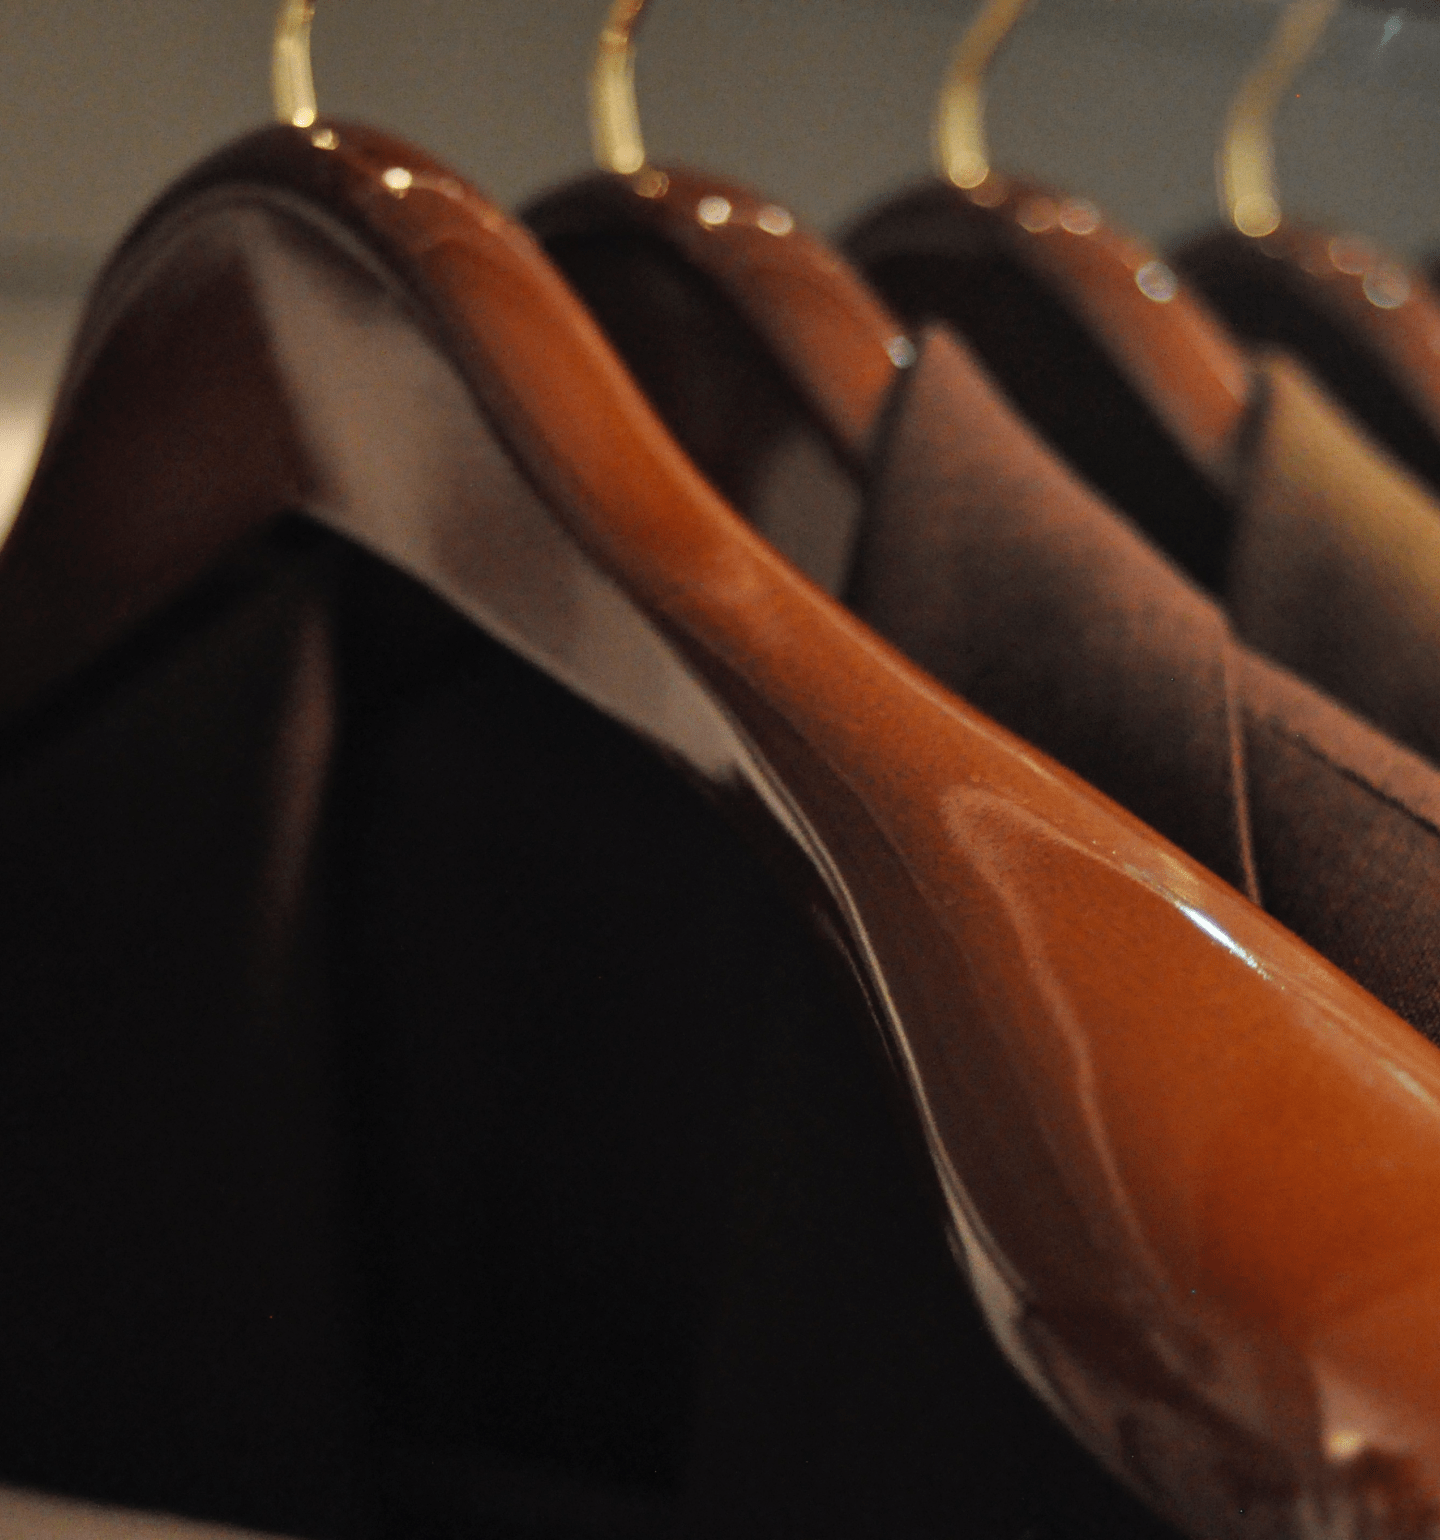 Close up photo of glossy, brown wooden hangers with curved edges, arranged with dark jackets hanging along a bar, facing the viewer.